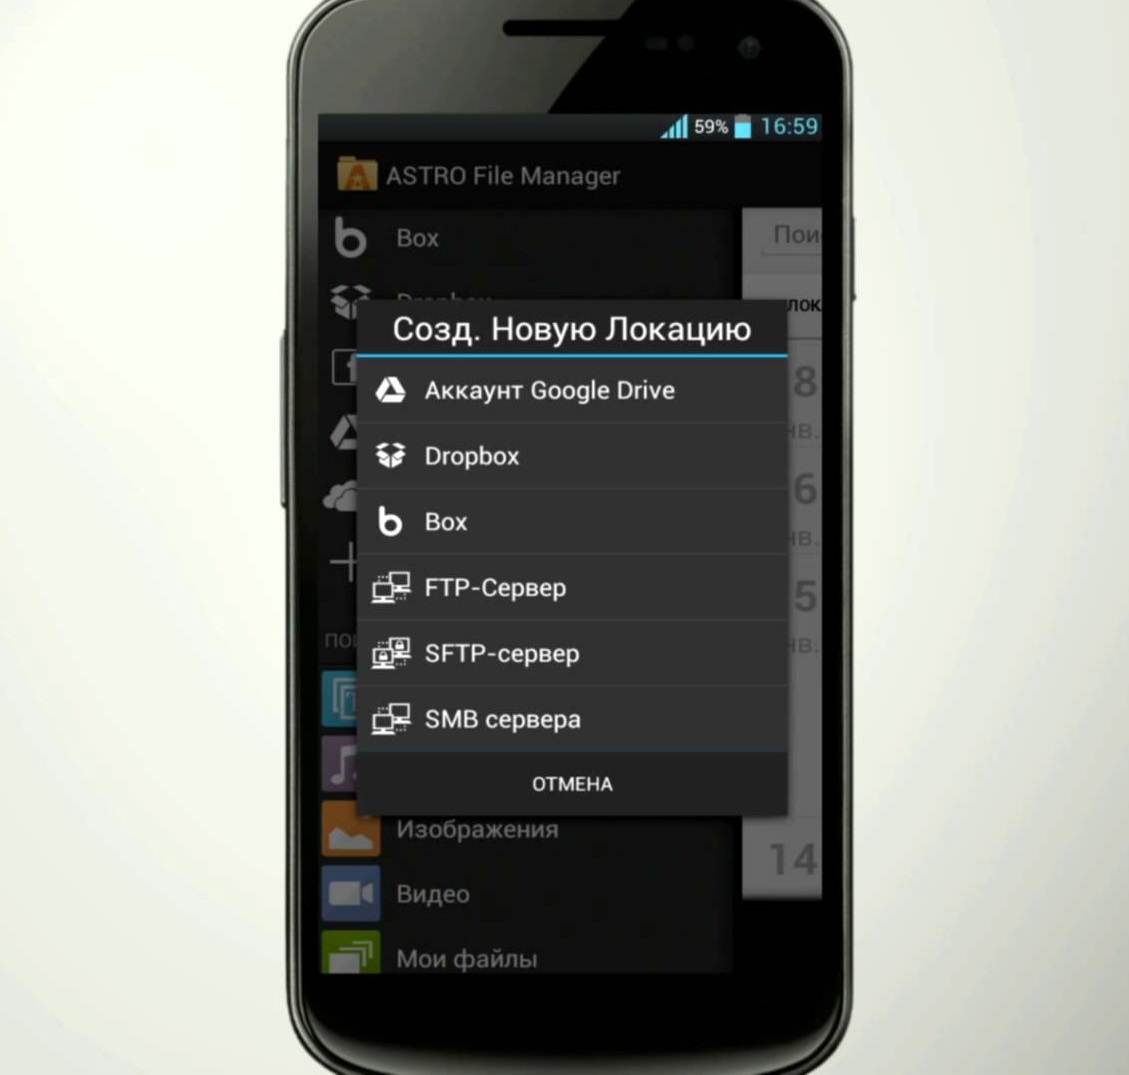 astro file manager, astro file manager скачать, astro file manager для андроид, astro, android astro file manager скачать